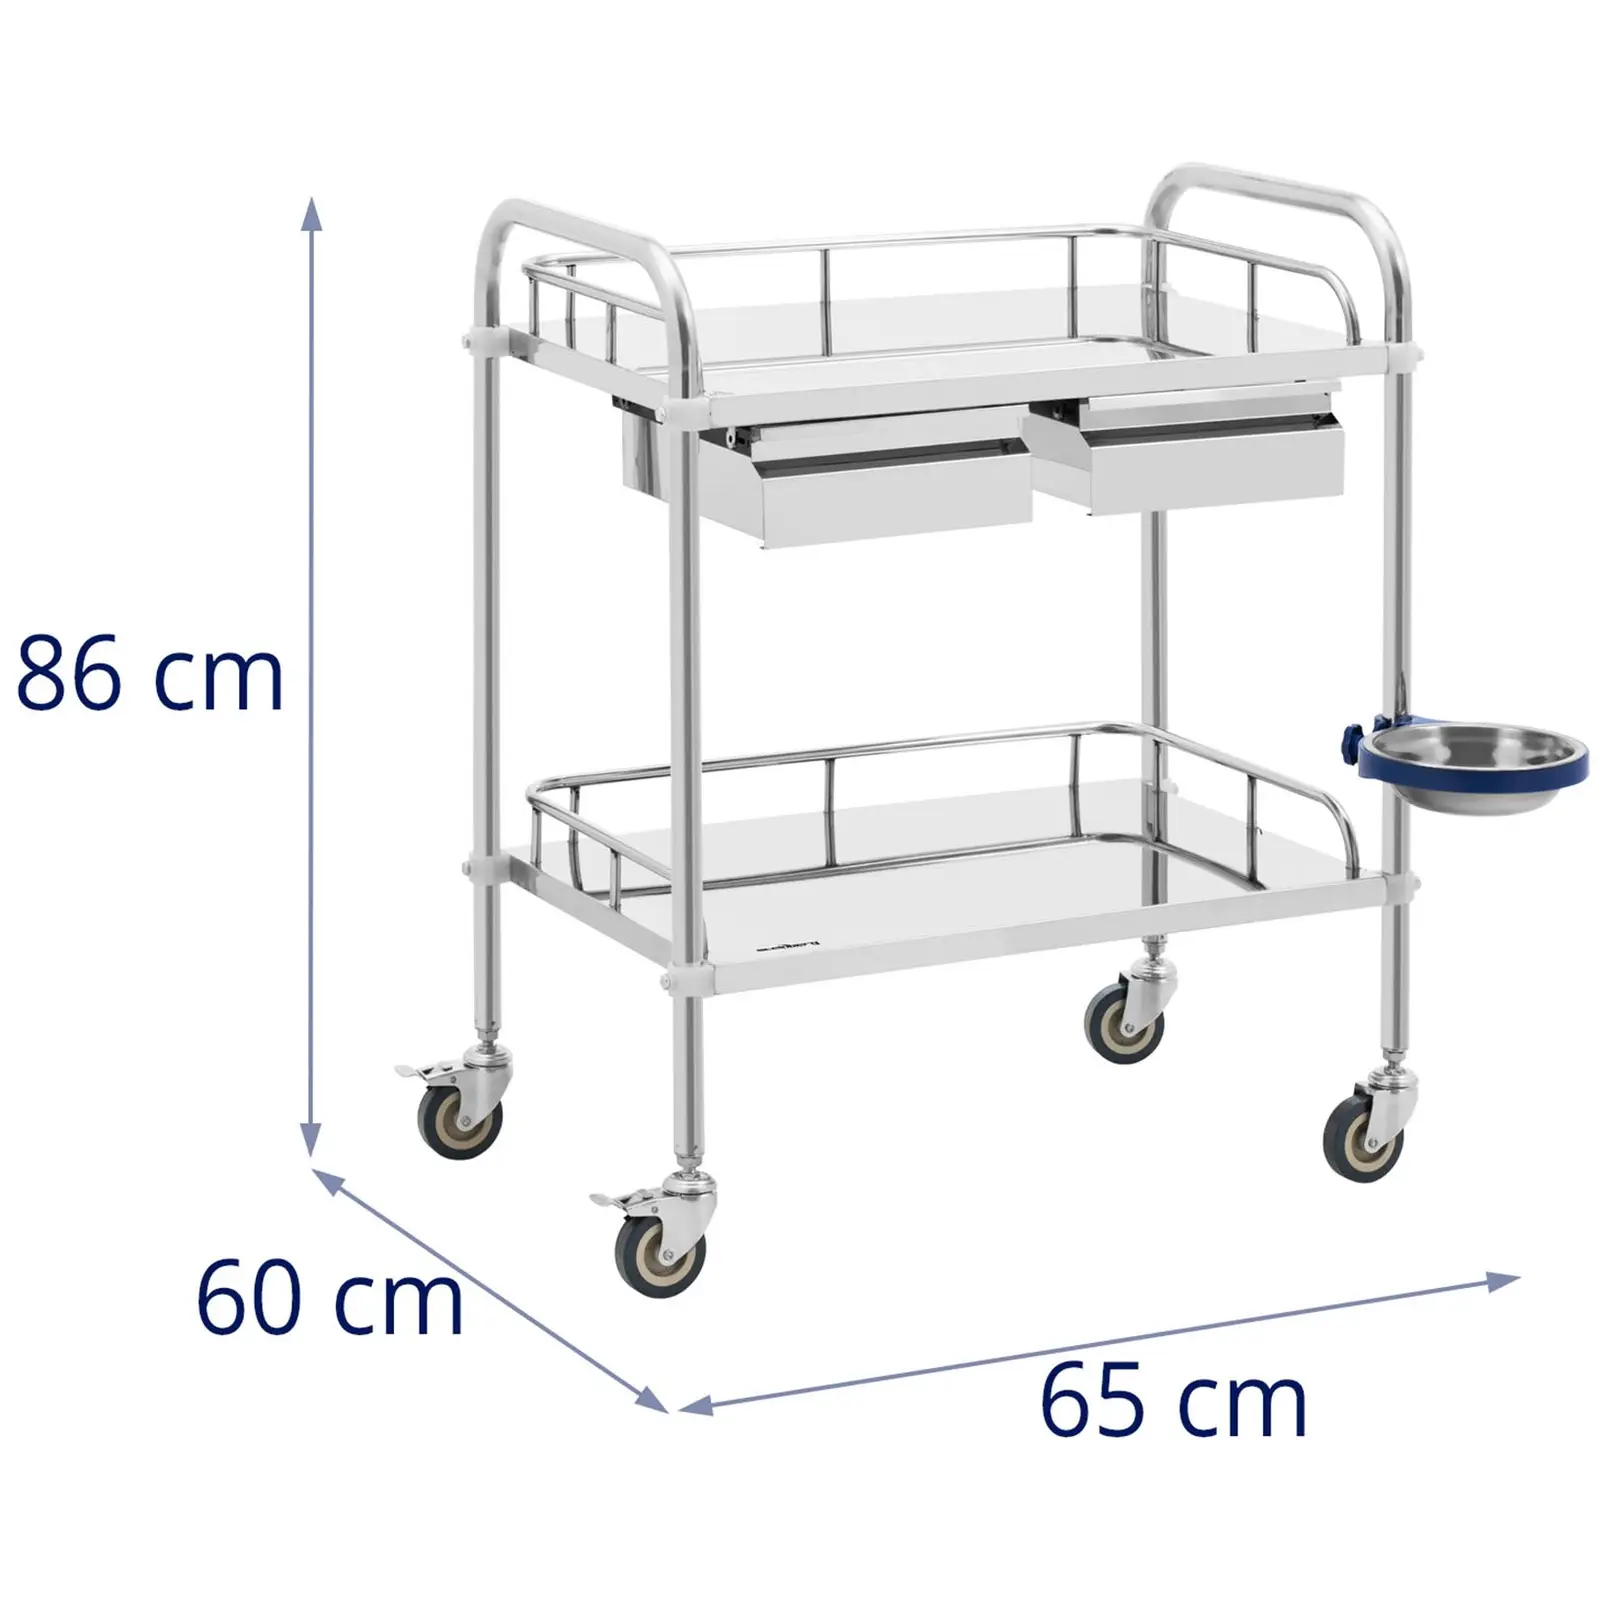 Laboratory Trolley - stainless steel - 2 shelves each 55 x 37 x 13 cm - 2 drawers - 20 kg